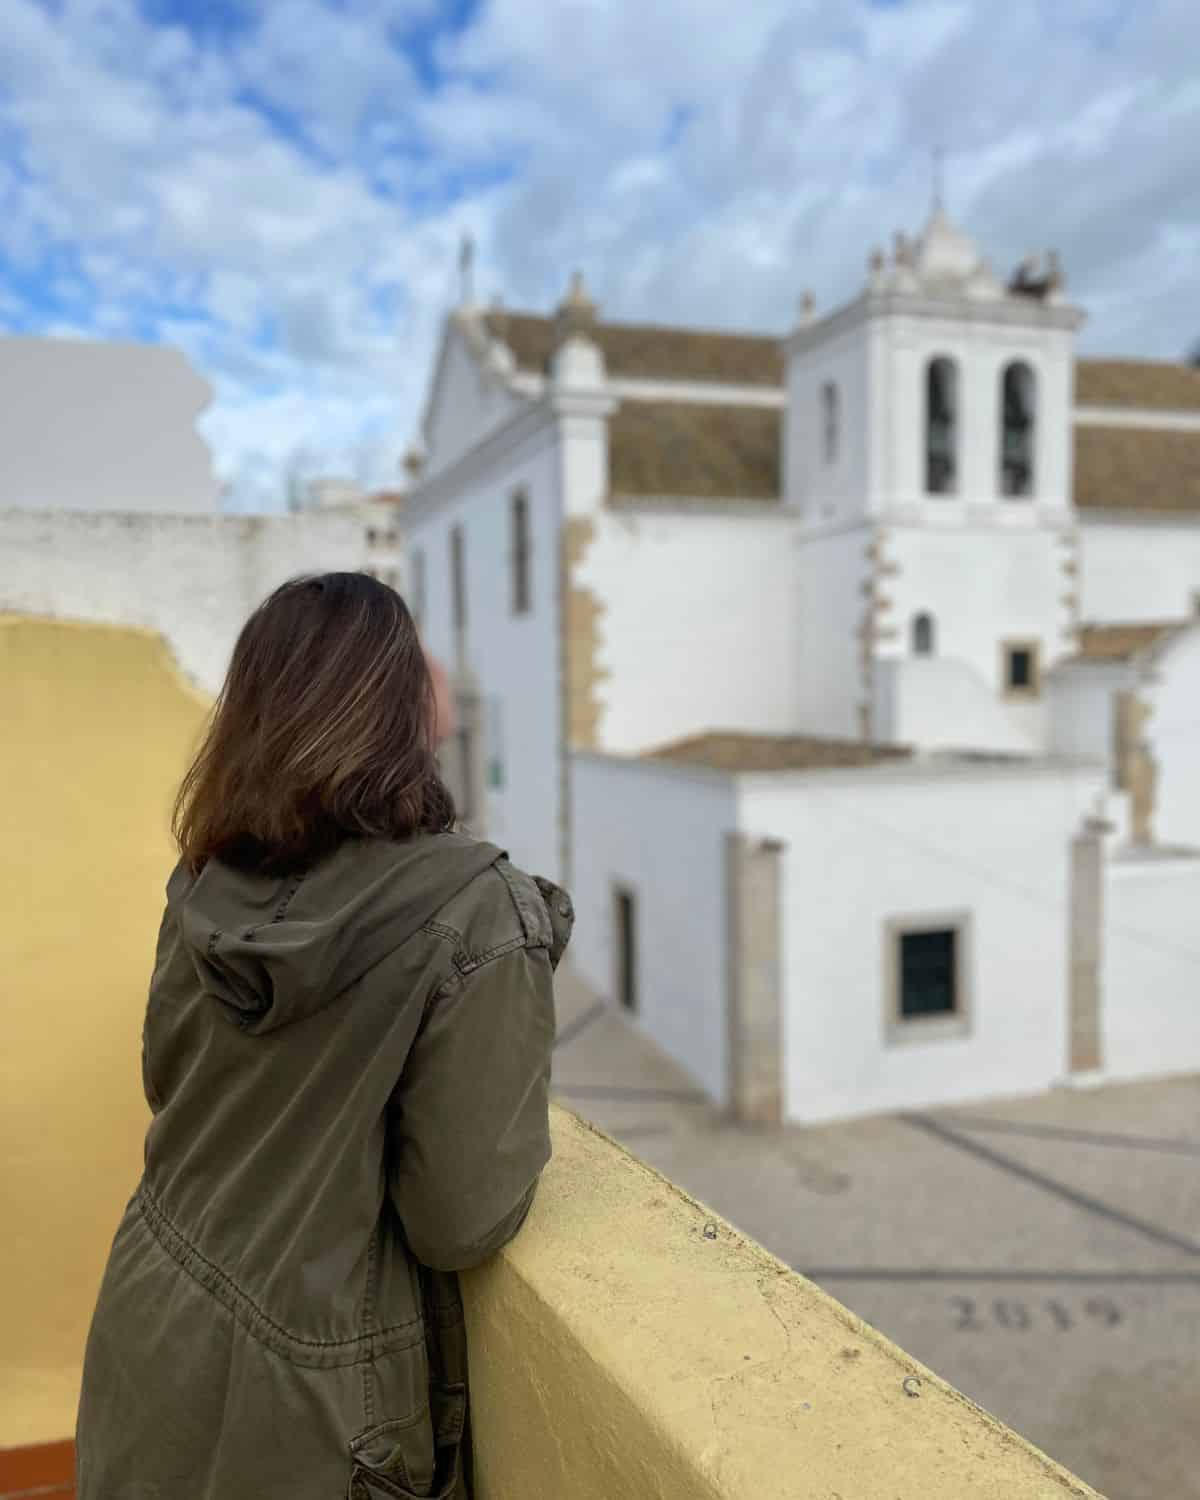 A woman in a green jacket stands with her back to the camera, looking out over a historic quarter. She's leaning on a yellow ochre wall, gazing at a classic white church with two bell towers. The image captures the contemplative solitude of solo travel amidst the charming architecture of an old European town.